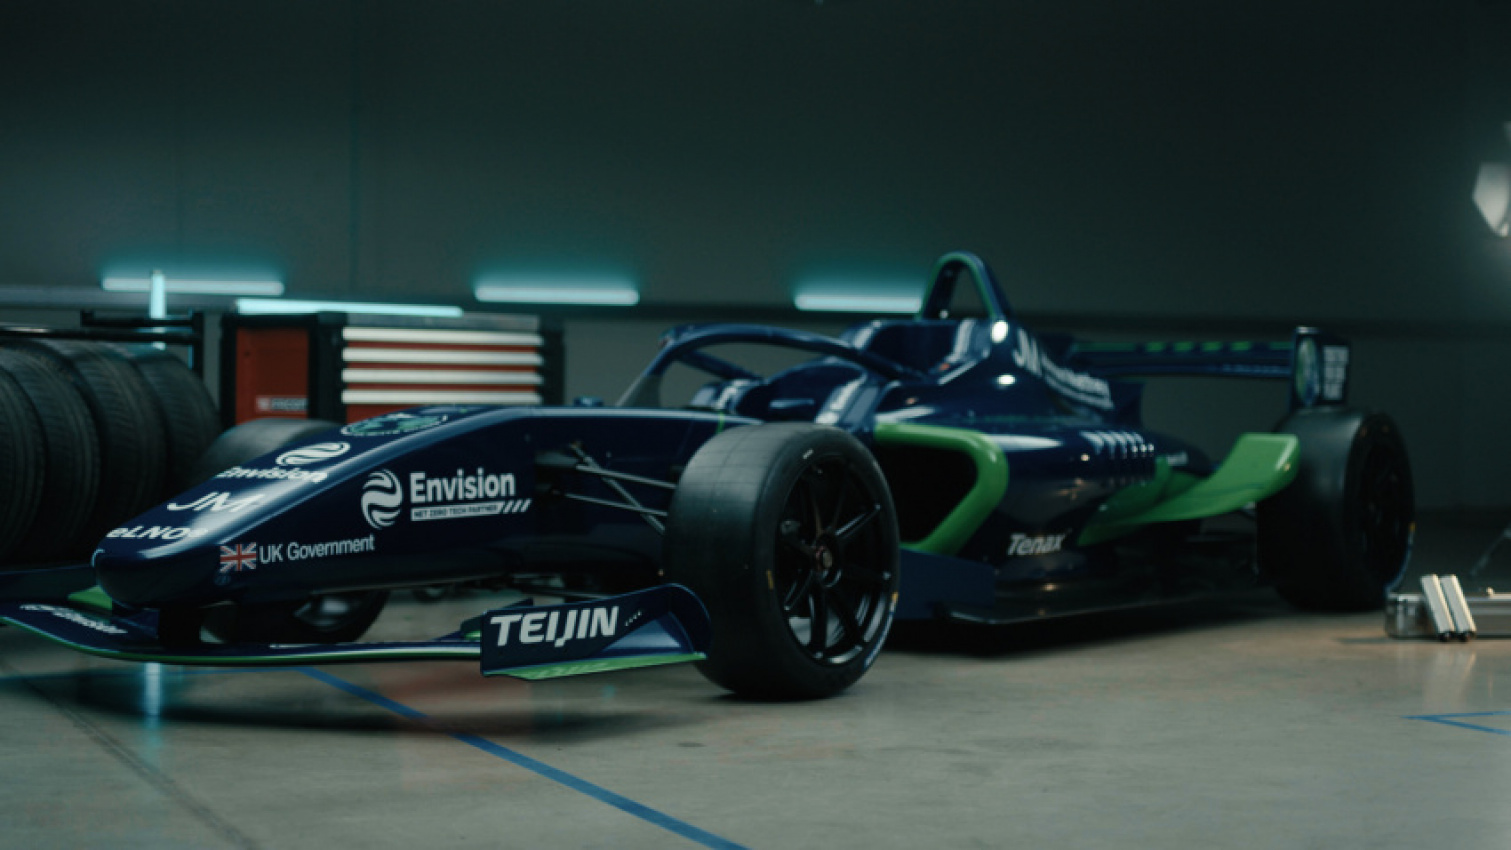 autos, cars, climate, cop26, electric cars, climate change, envision virgin racing, formula e, johnson matthey, sylvain filippi, climate, cop26, climate change, cop26, climate change, world’s first electric two-seater formula race car to be revealed at cop26 summit